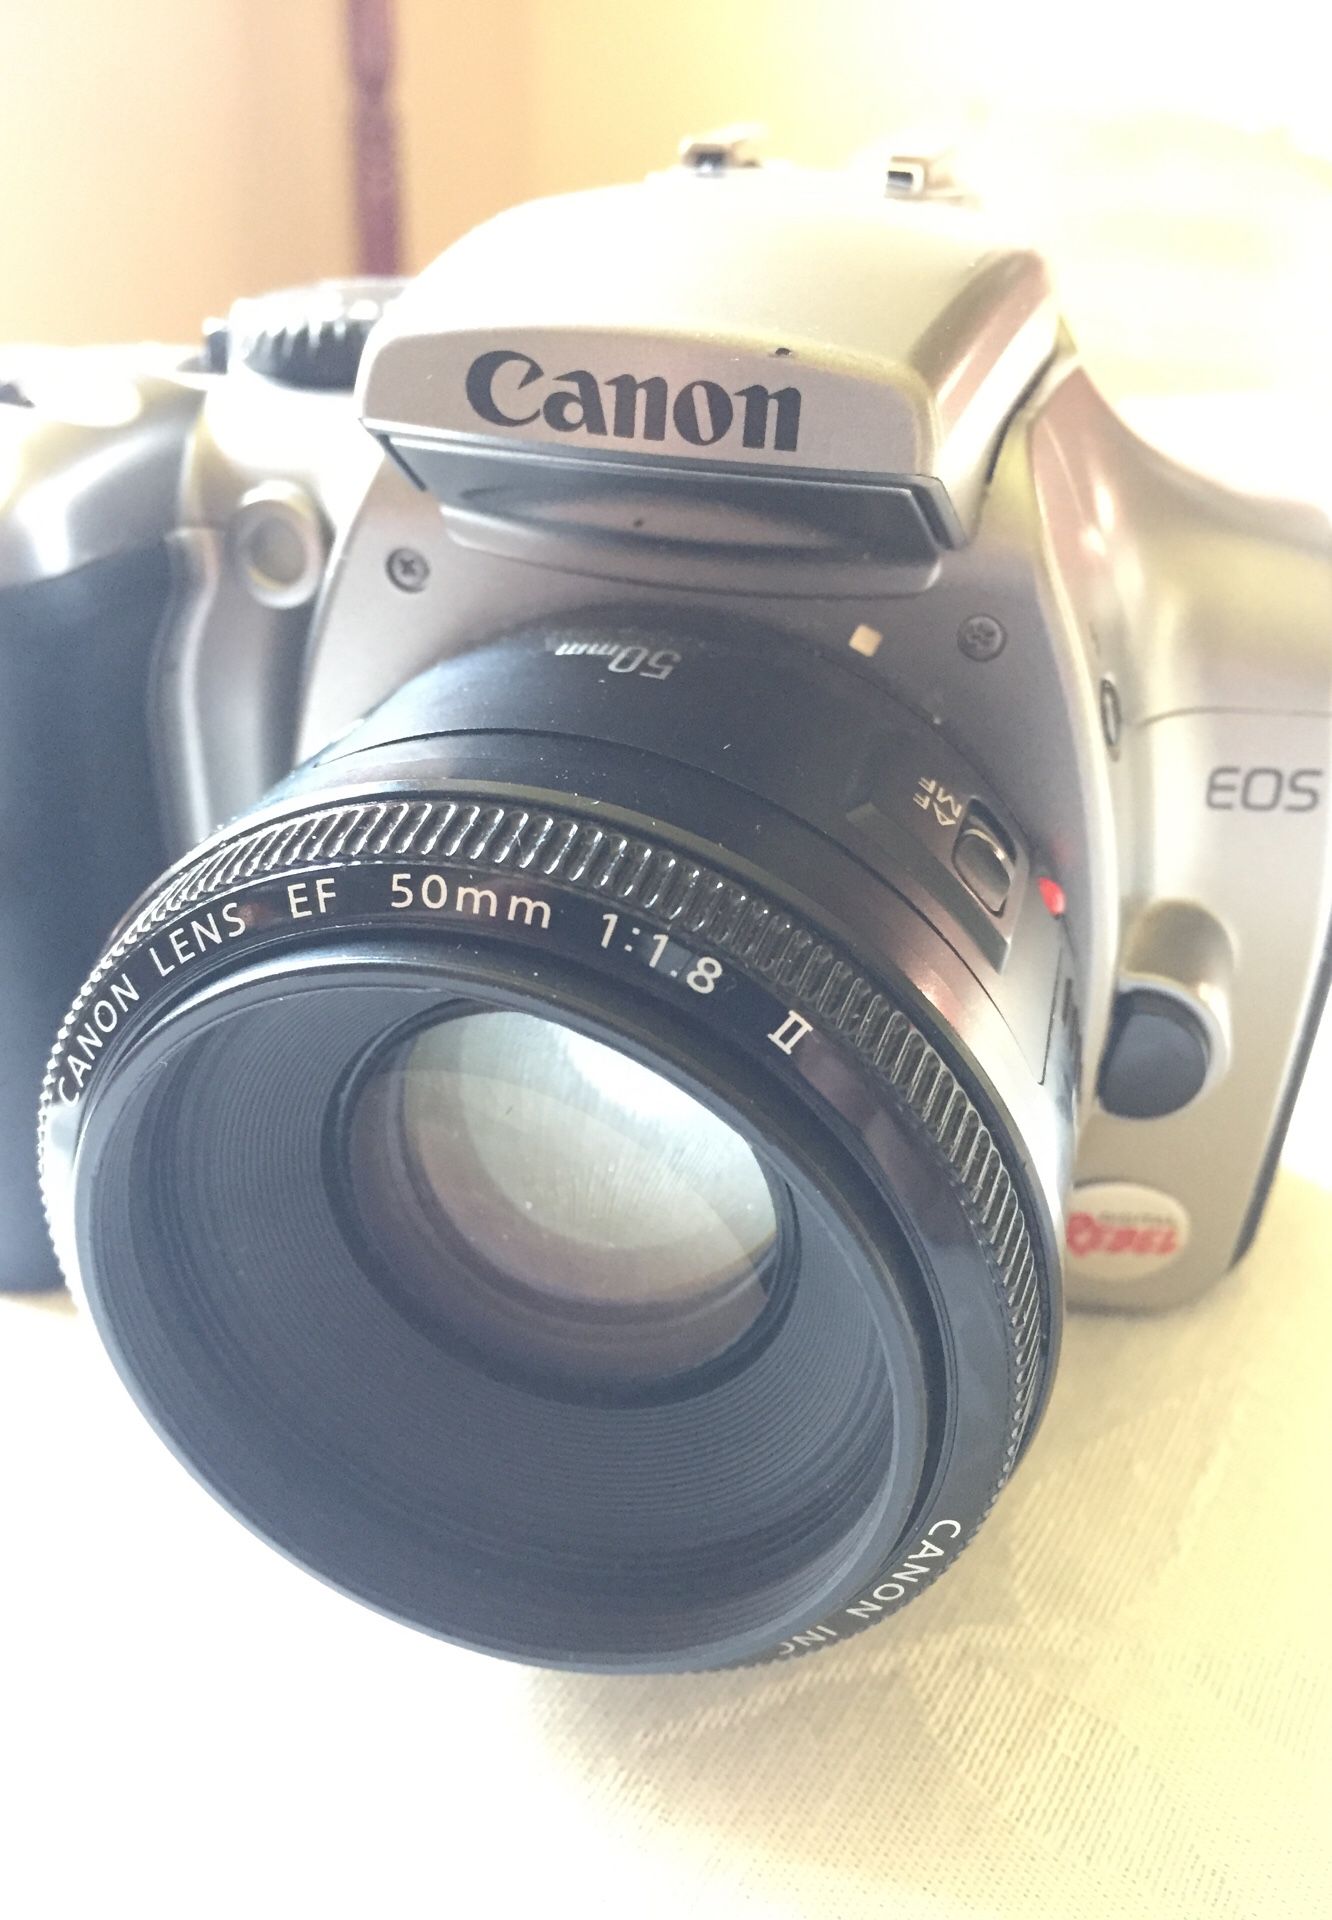 Canon EOS Digital Rebel camera with EF 50mm lens 1:1.8 II, battery and card